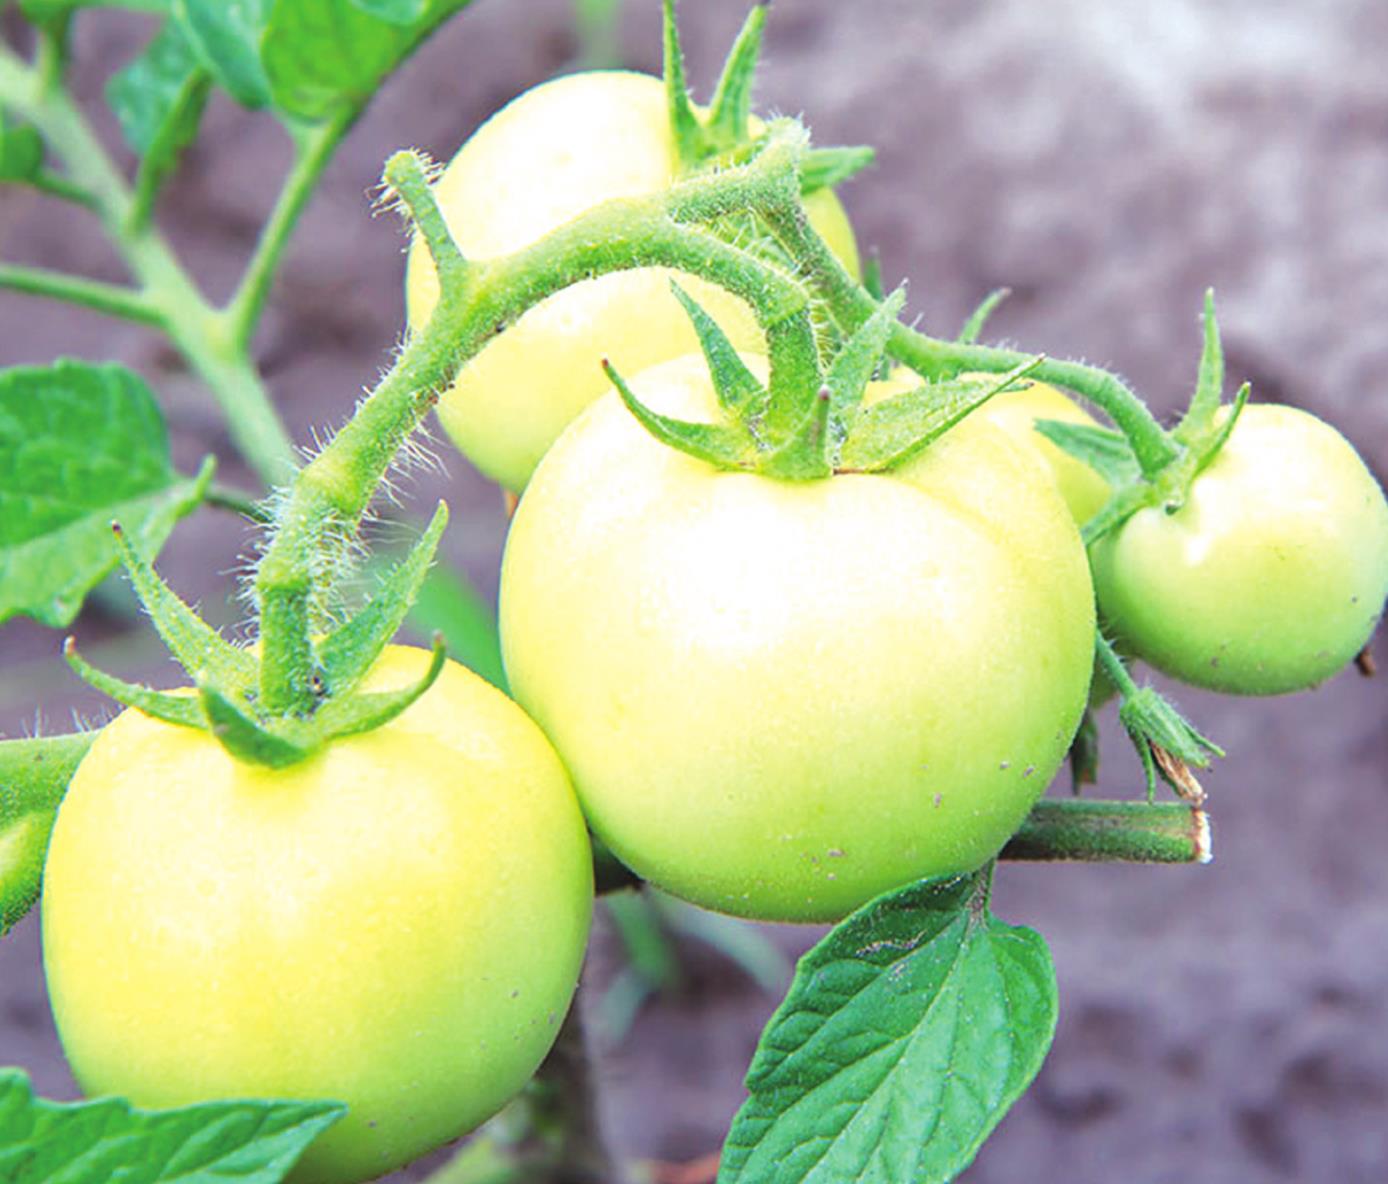 Gardeners still can enjoy the taste of fresh tomatoes after the frost by ripening their larger green tomatoes indoors. The rest can be used for pickled green tomatoes or green tomato chutney. Provided